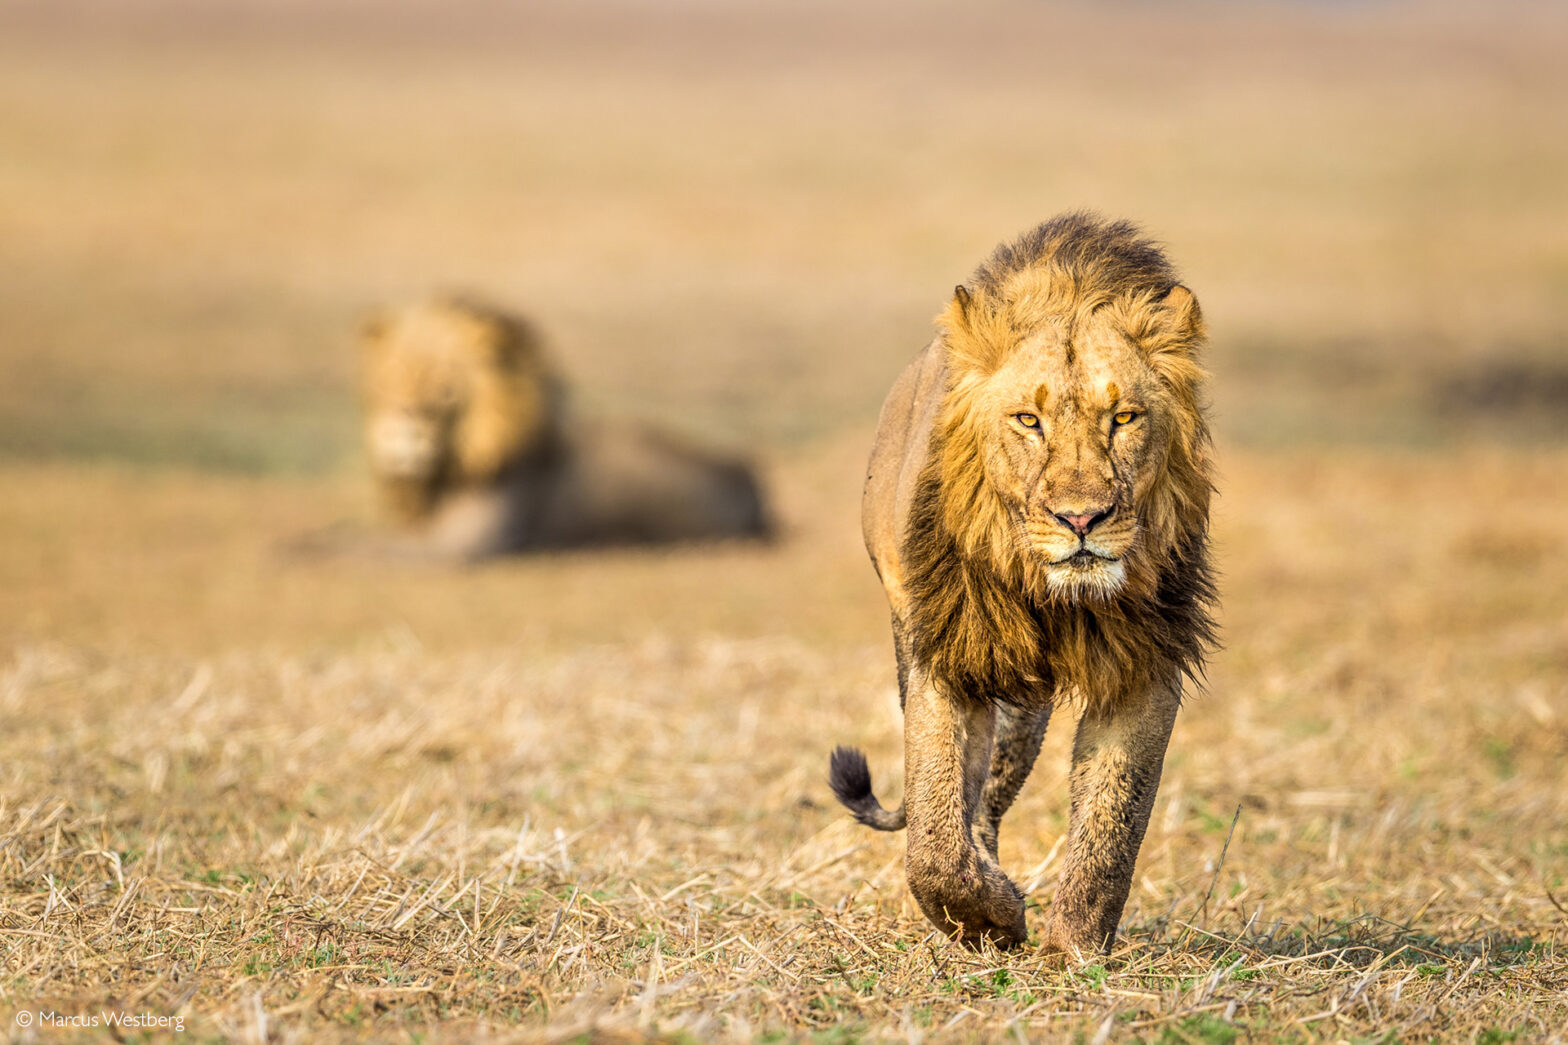 Scientists discover the unique signature of a lion's roar using machine  learning